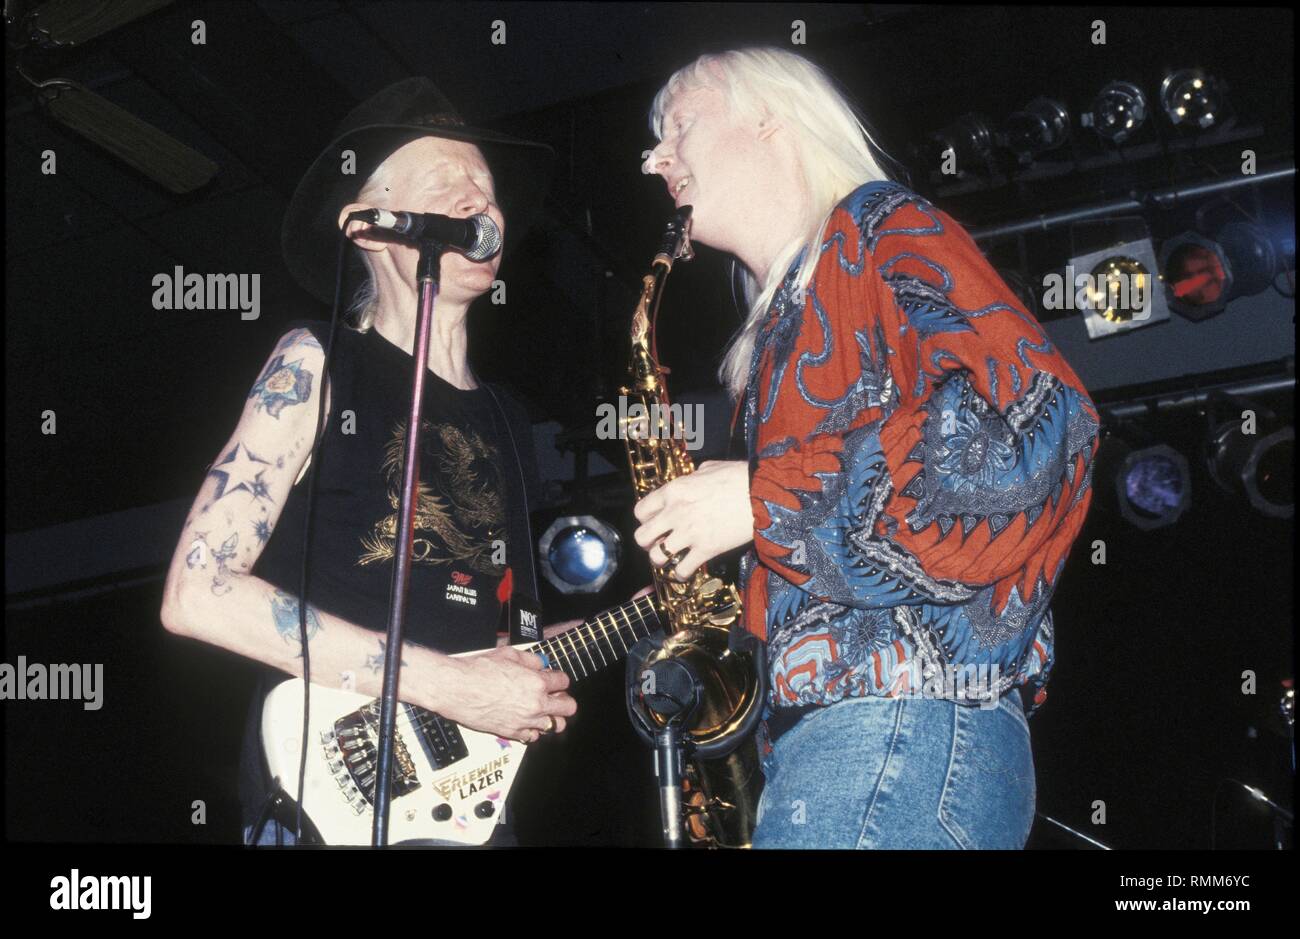 Brothers Johnny and Edgar WInter are shown performing on stage during a 'live' concert appearance. Stock Photo